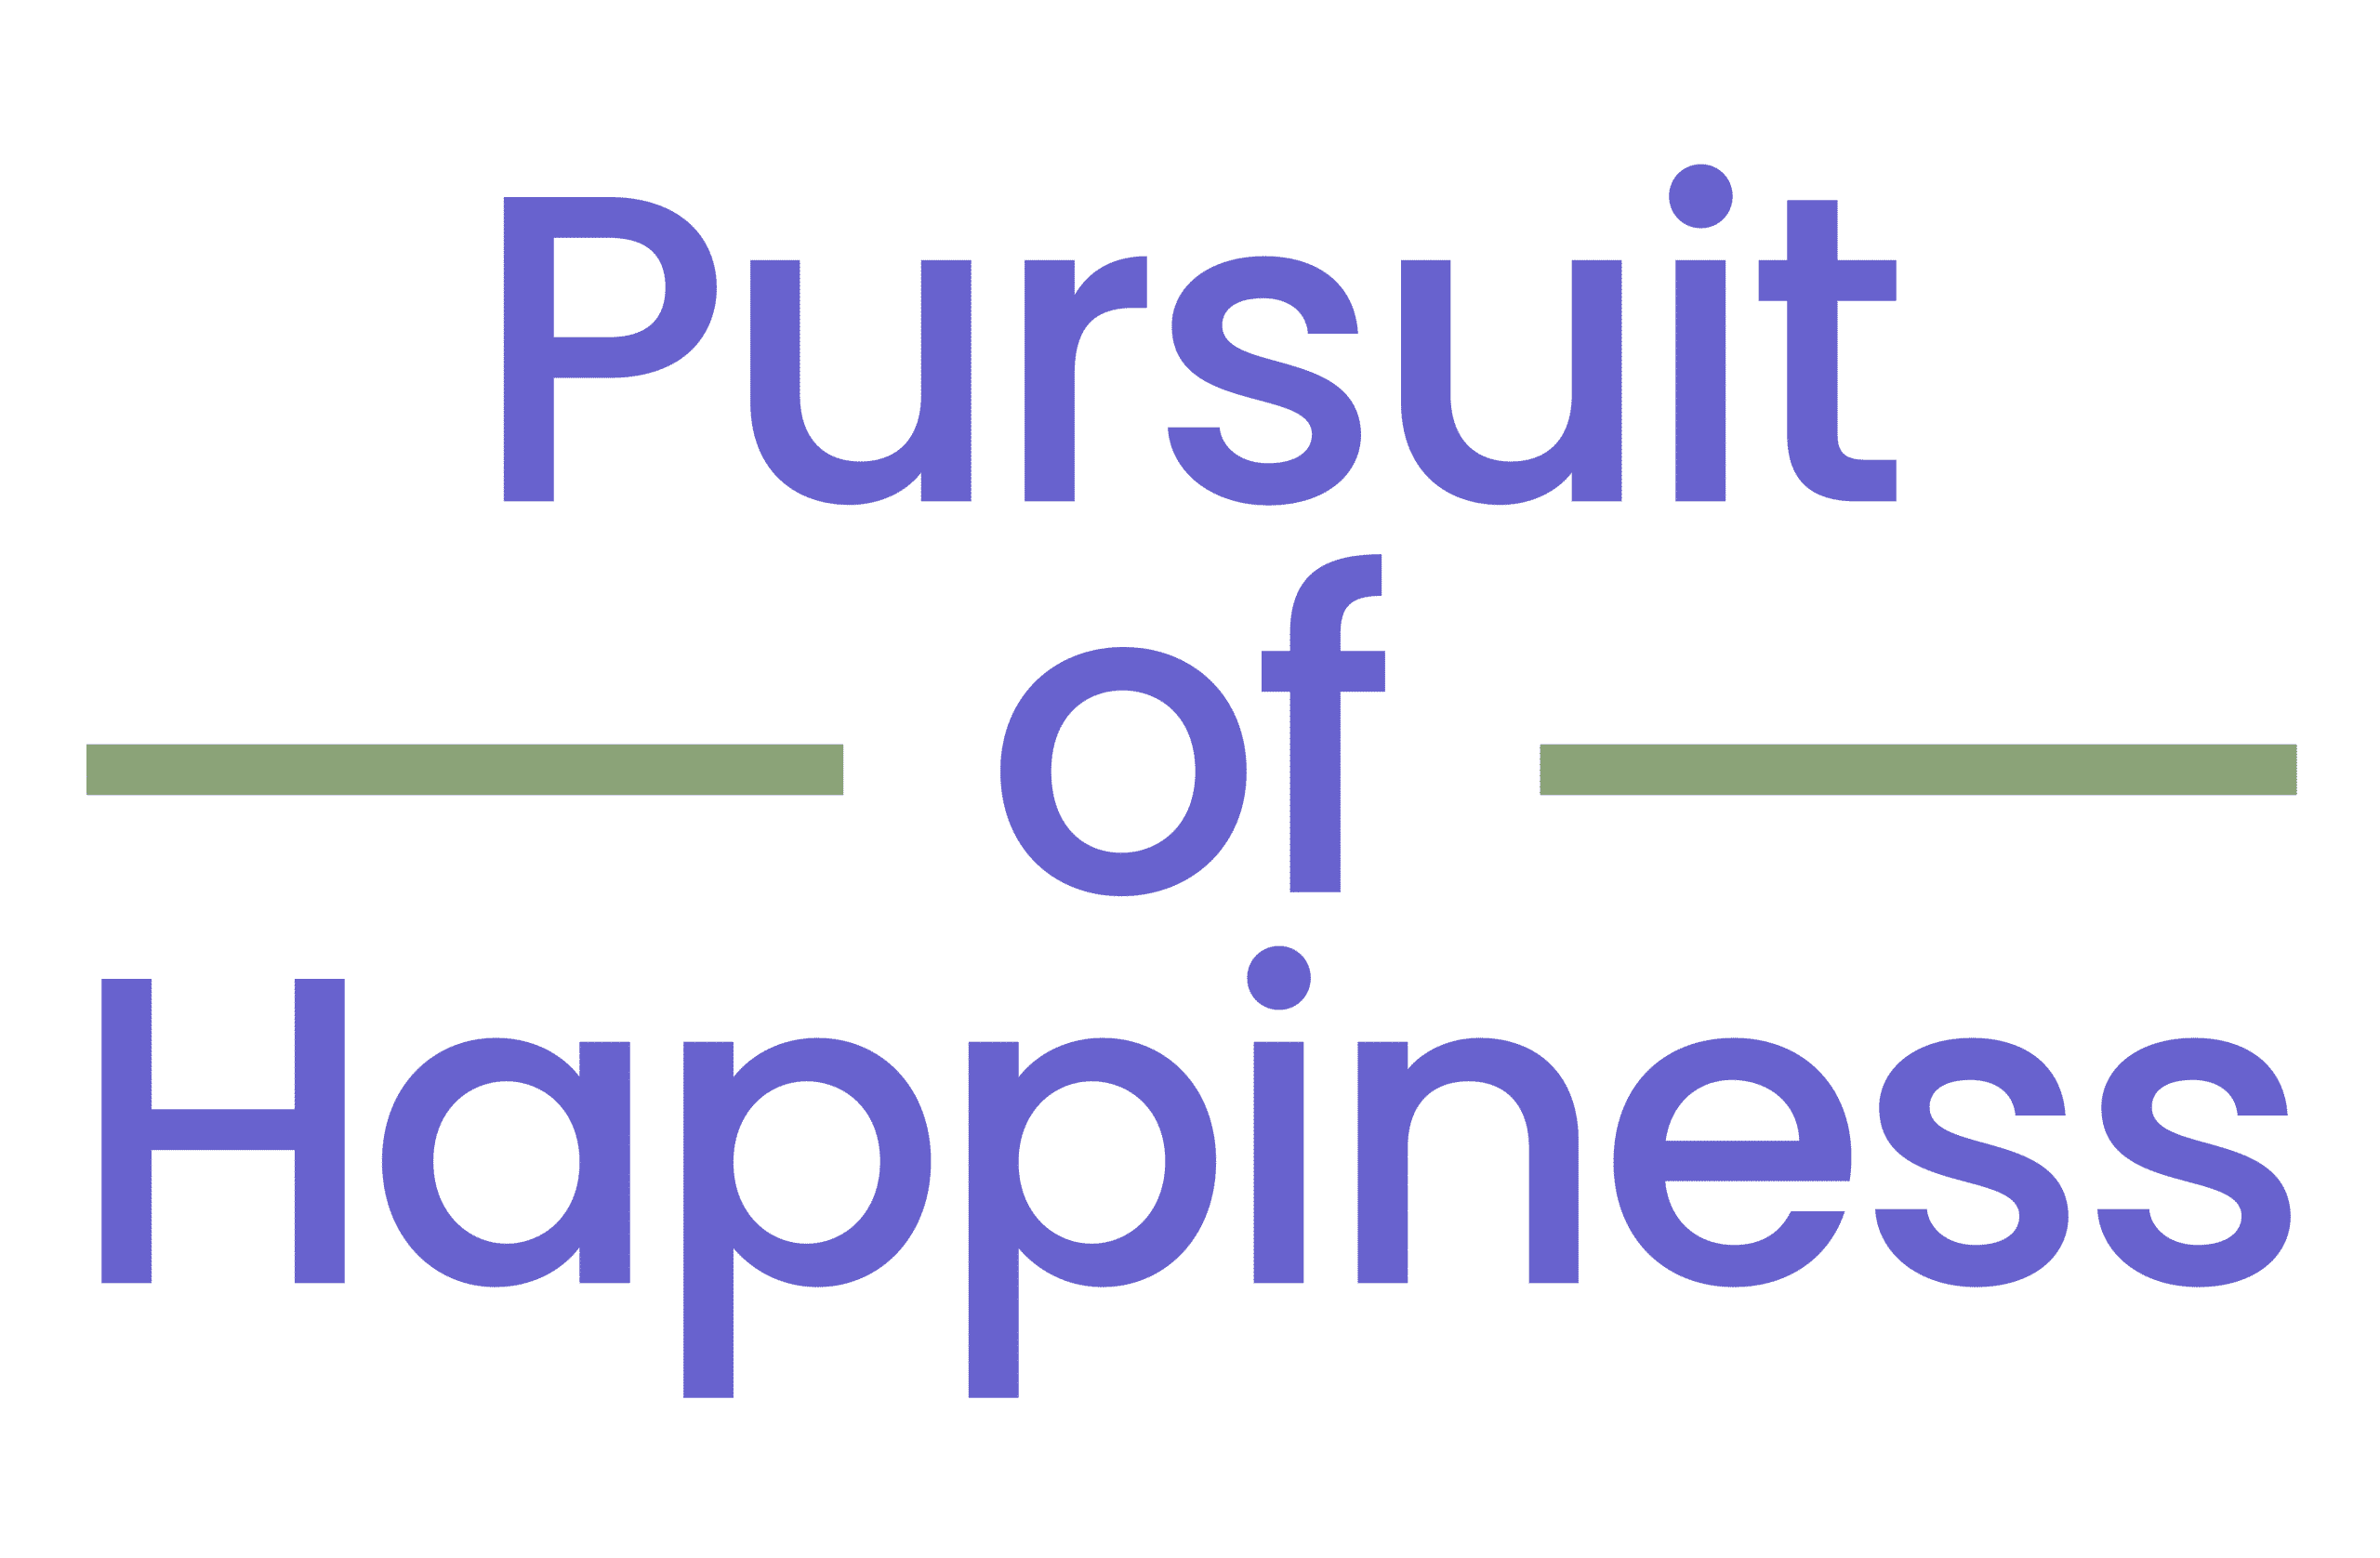 examples of being optimistic